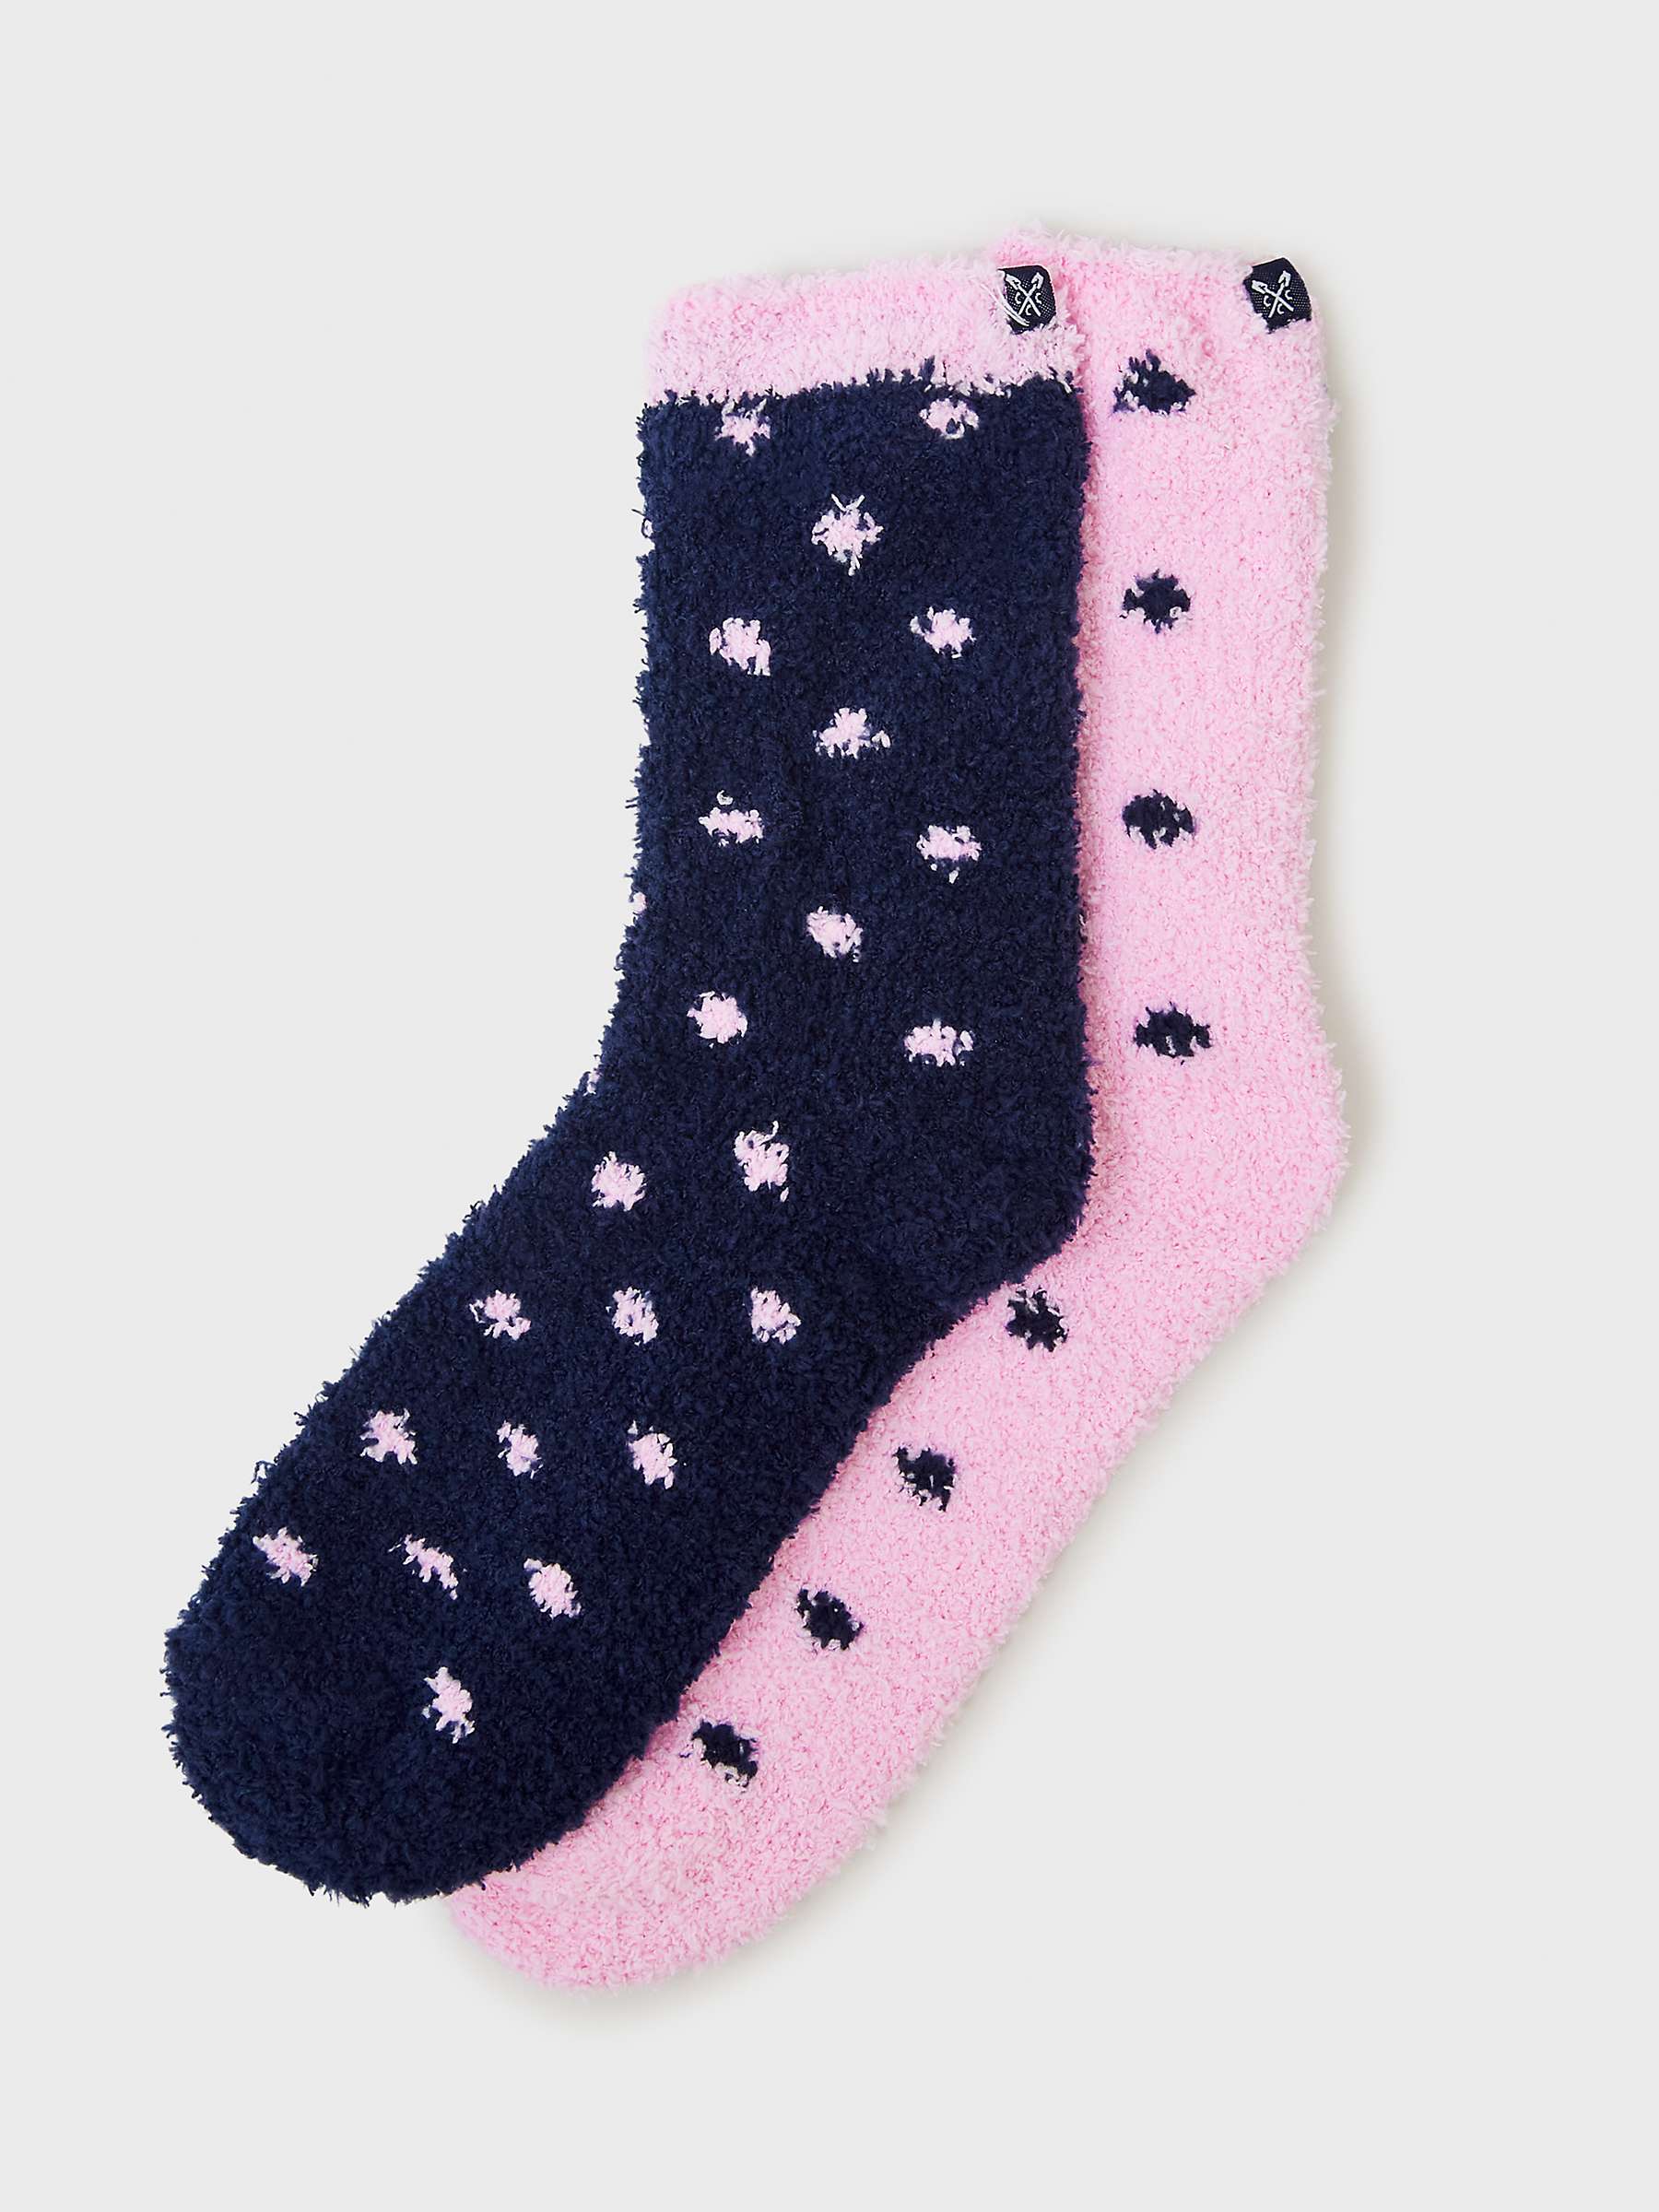 Buy Crew Clothing Fluffy Socks, Pack of 2, Multi Pink Online at johnlewis.com